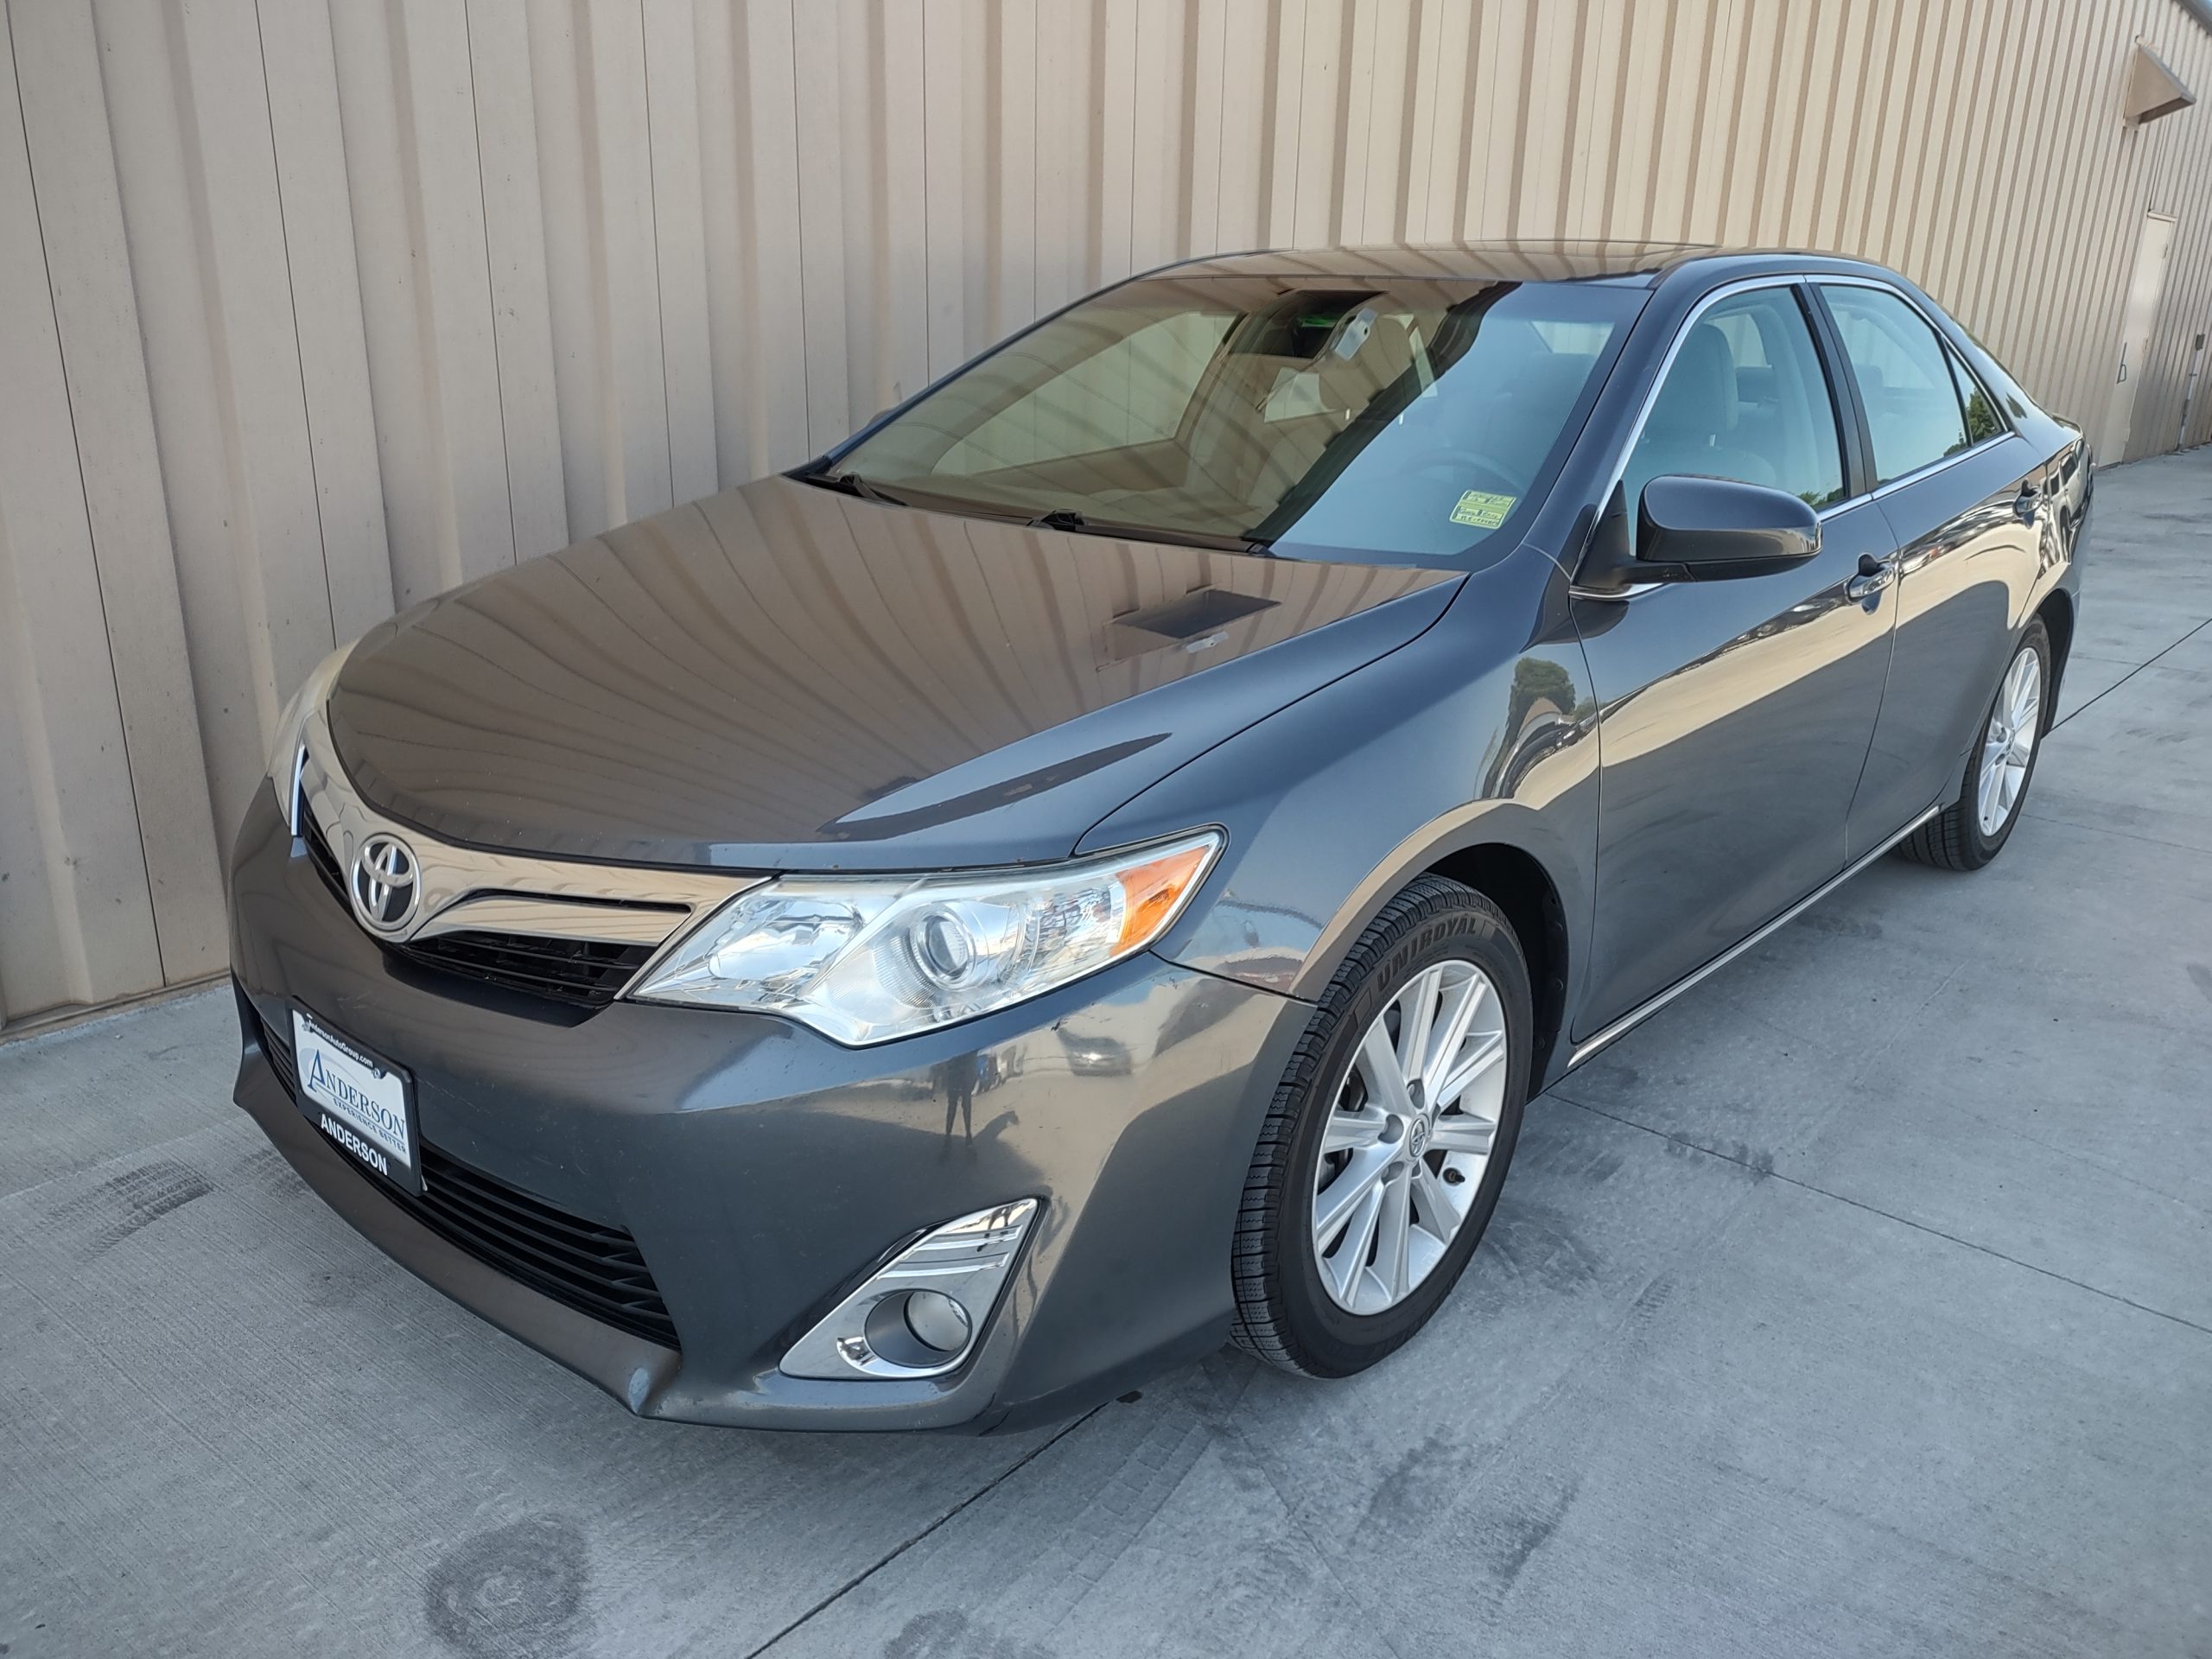 Used 2013 Toyota Camry SE Sedan for sale in 